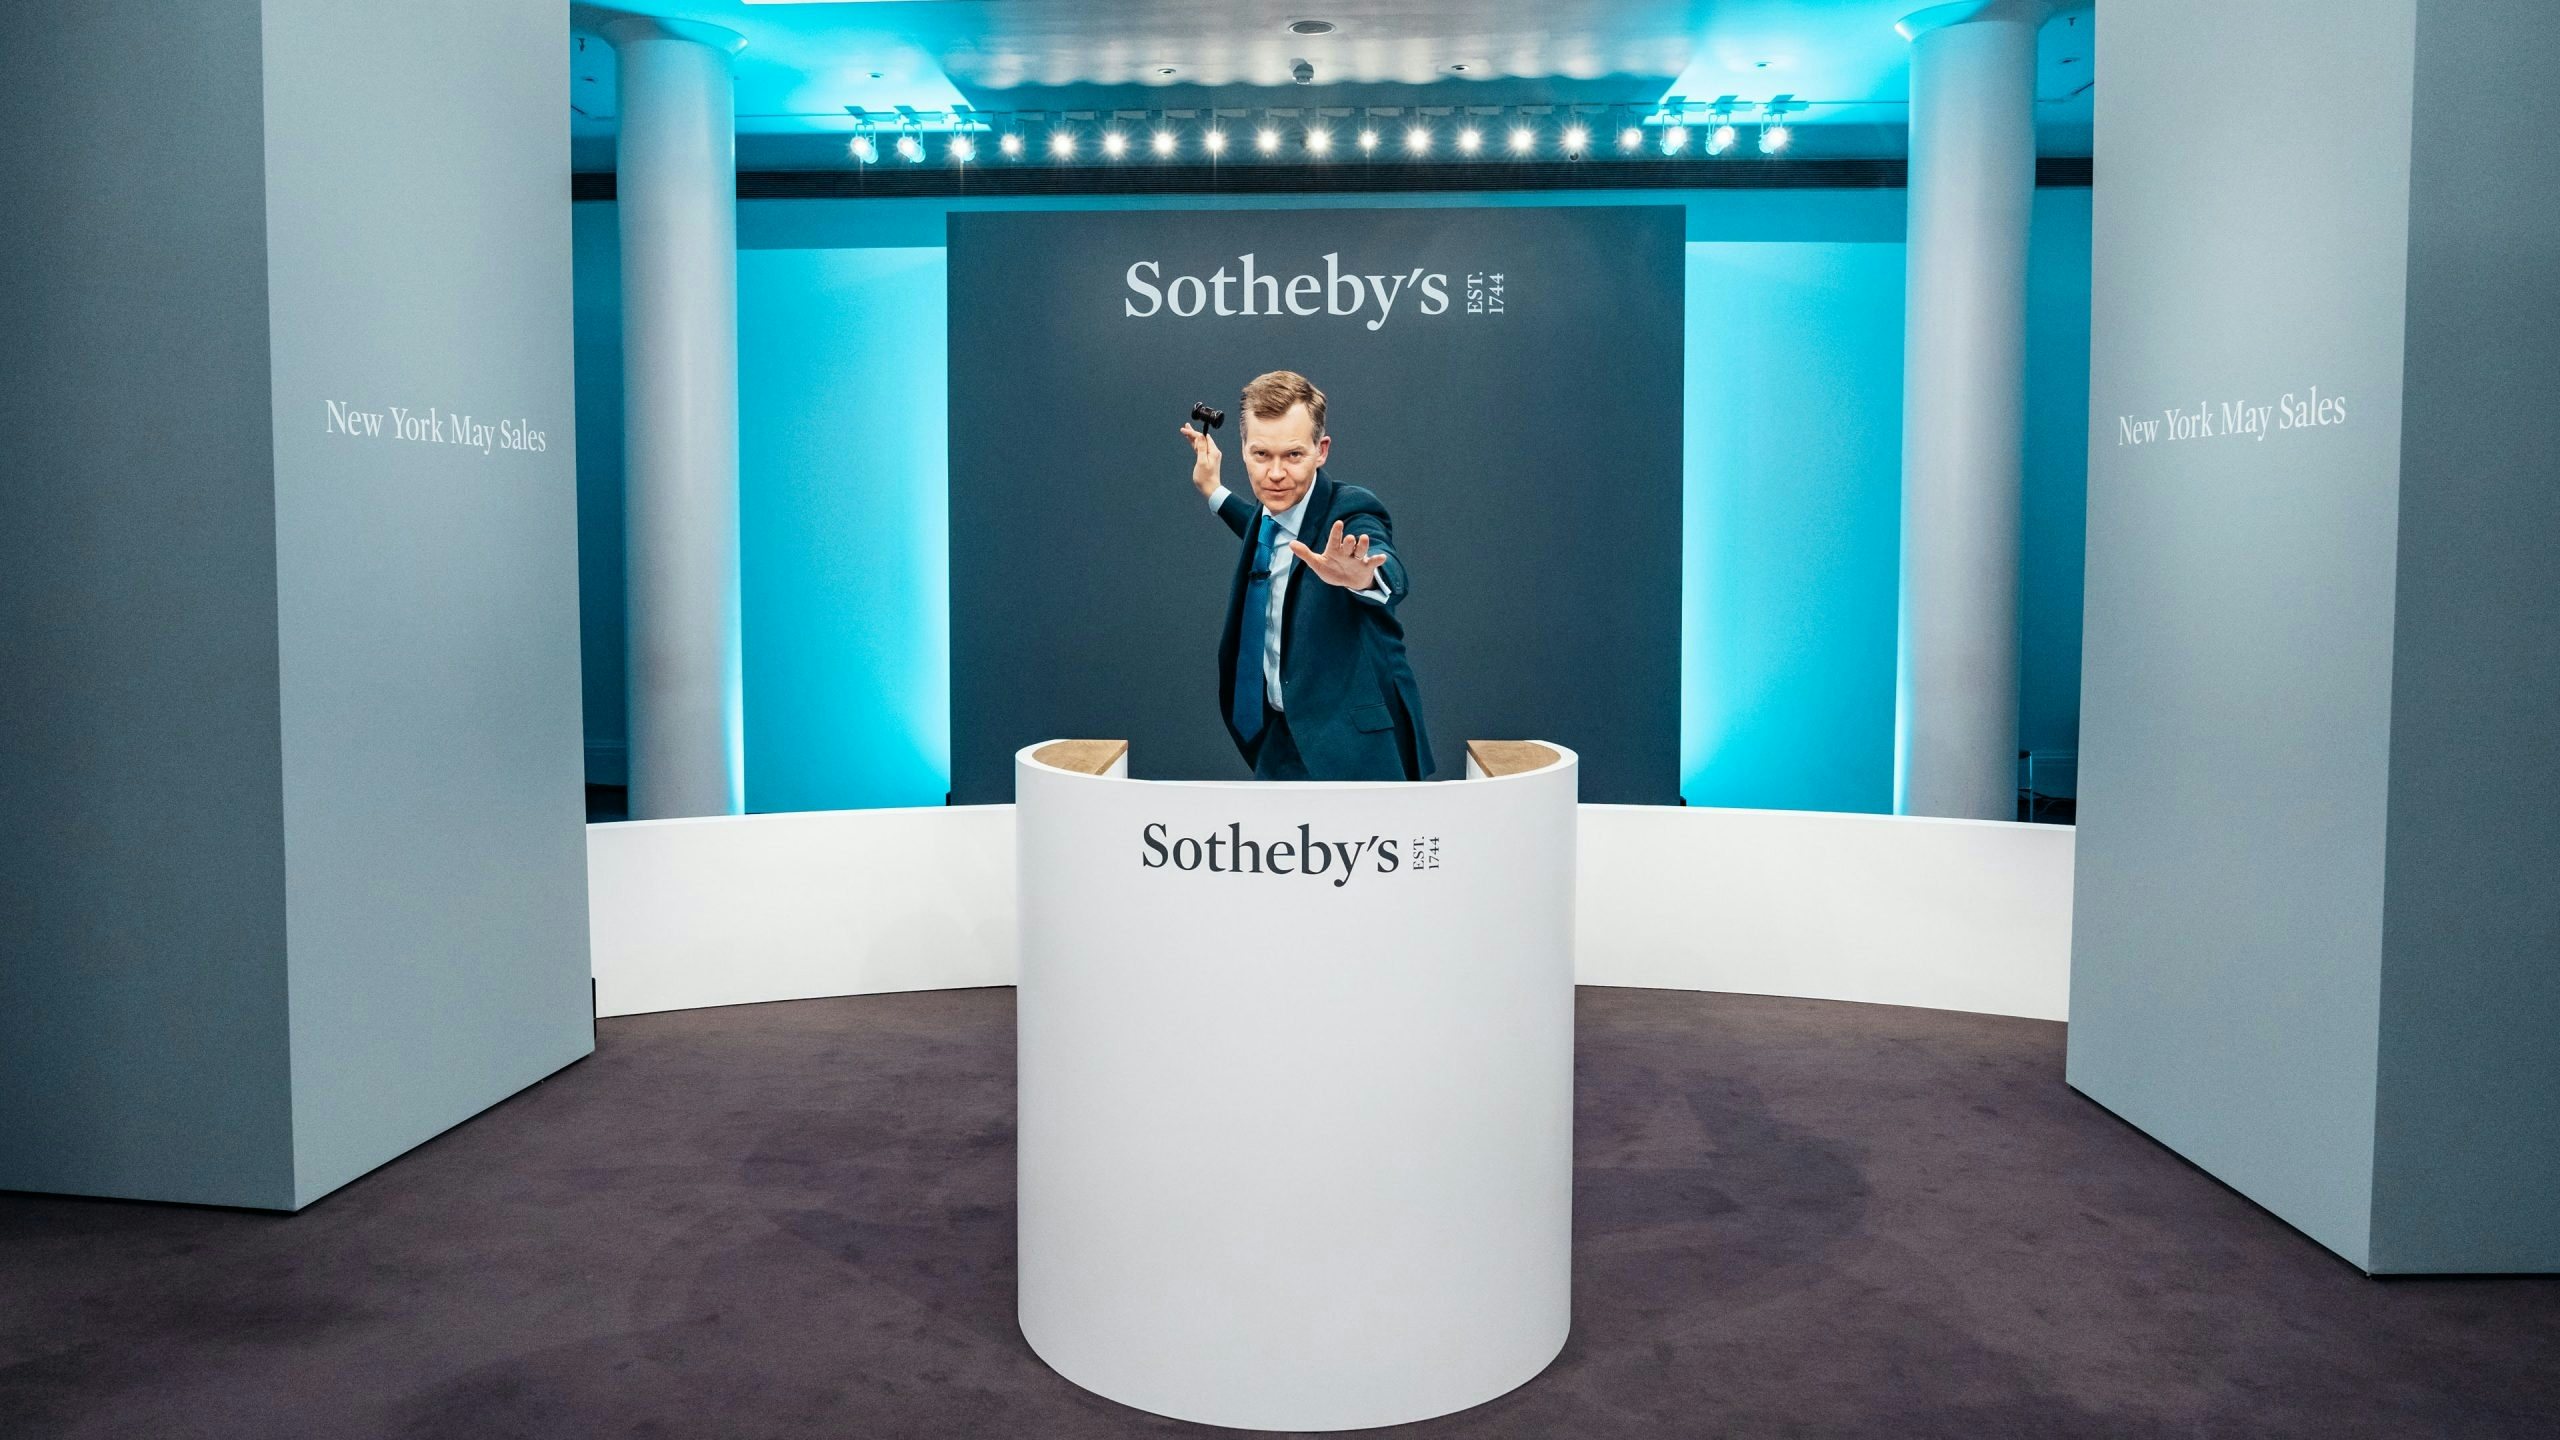 By positioning their artisan-crafted collaboration alongside masterpieces, have Sotheby's and Loewe discovered a new way to market crossover luxury to culture-hungry Chinese consumers? Photo: Courtesy of Sotheby’s